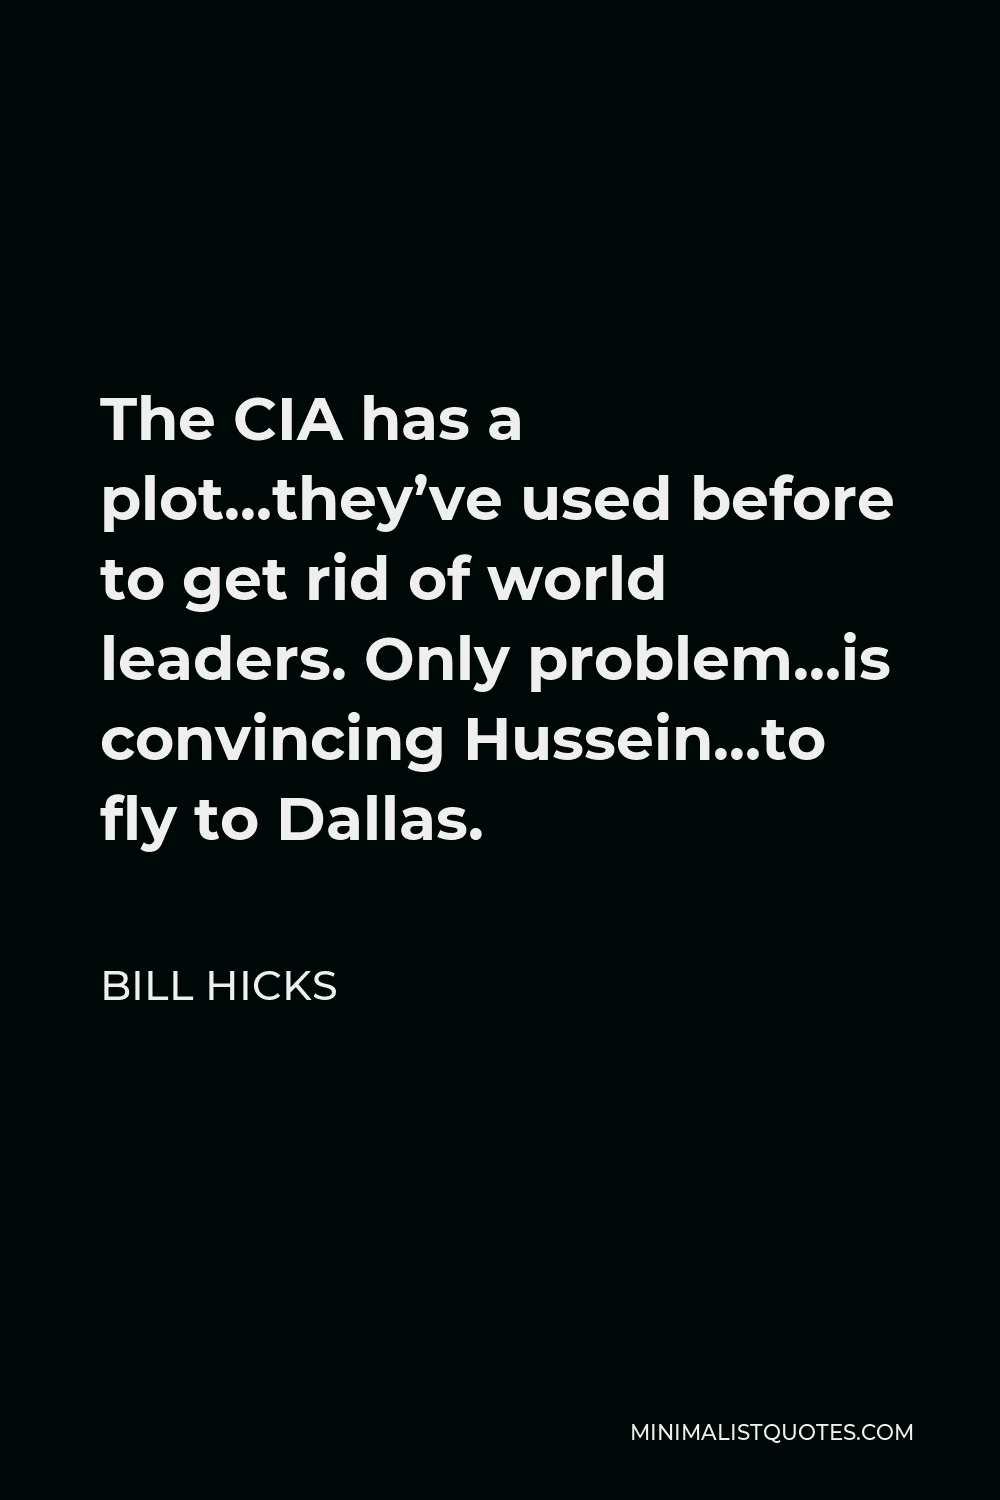 Bill Hicks Quote - The CIA has a plot…they’ve used before to get rid of world leaders. Only problem…is convincing Hussein…to fly to Dallas.